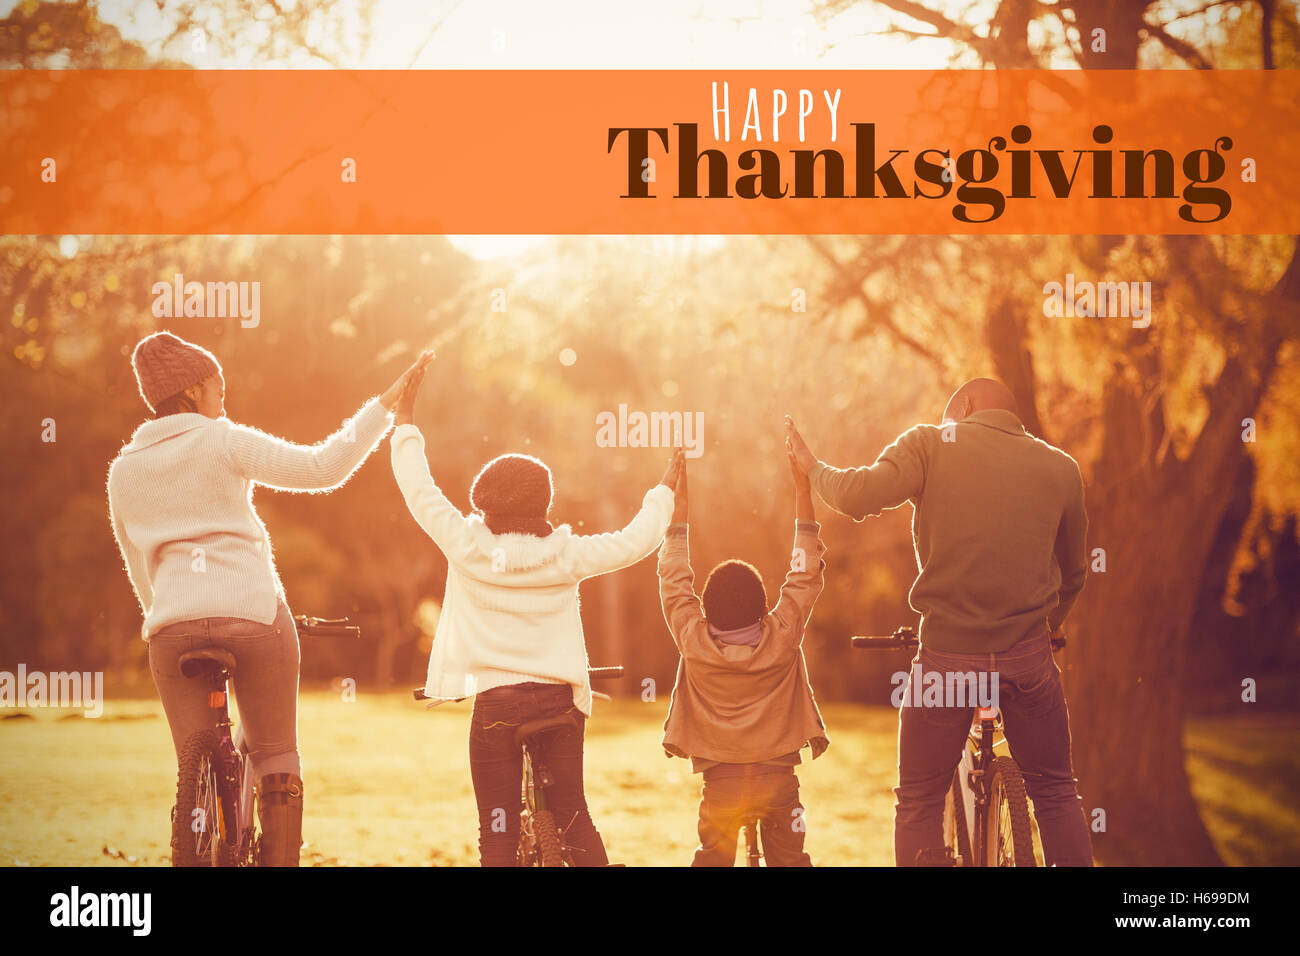 Composite image of digitally generated image of happy thanksgiving text Stock Photo